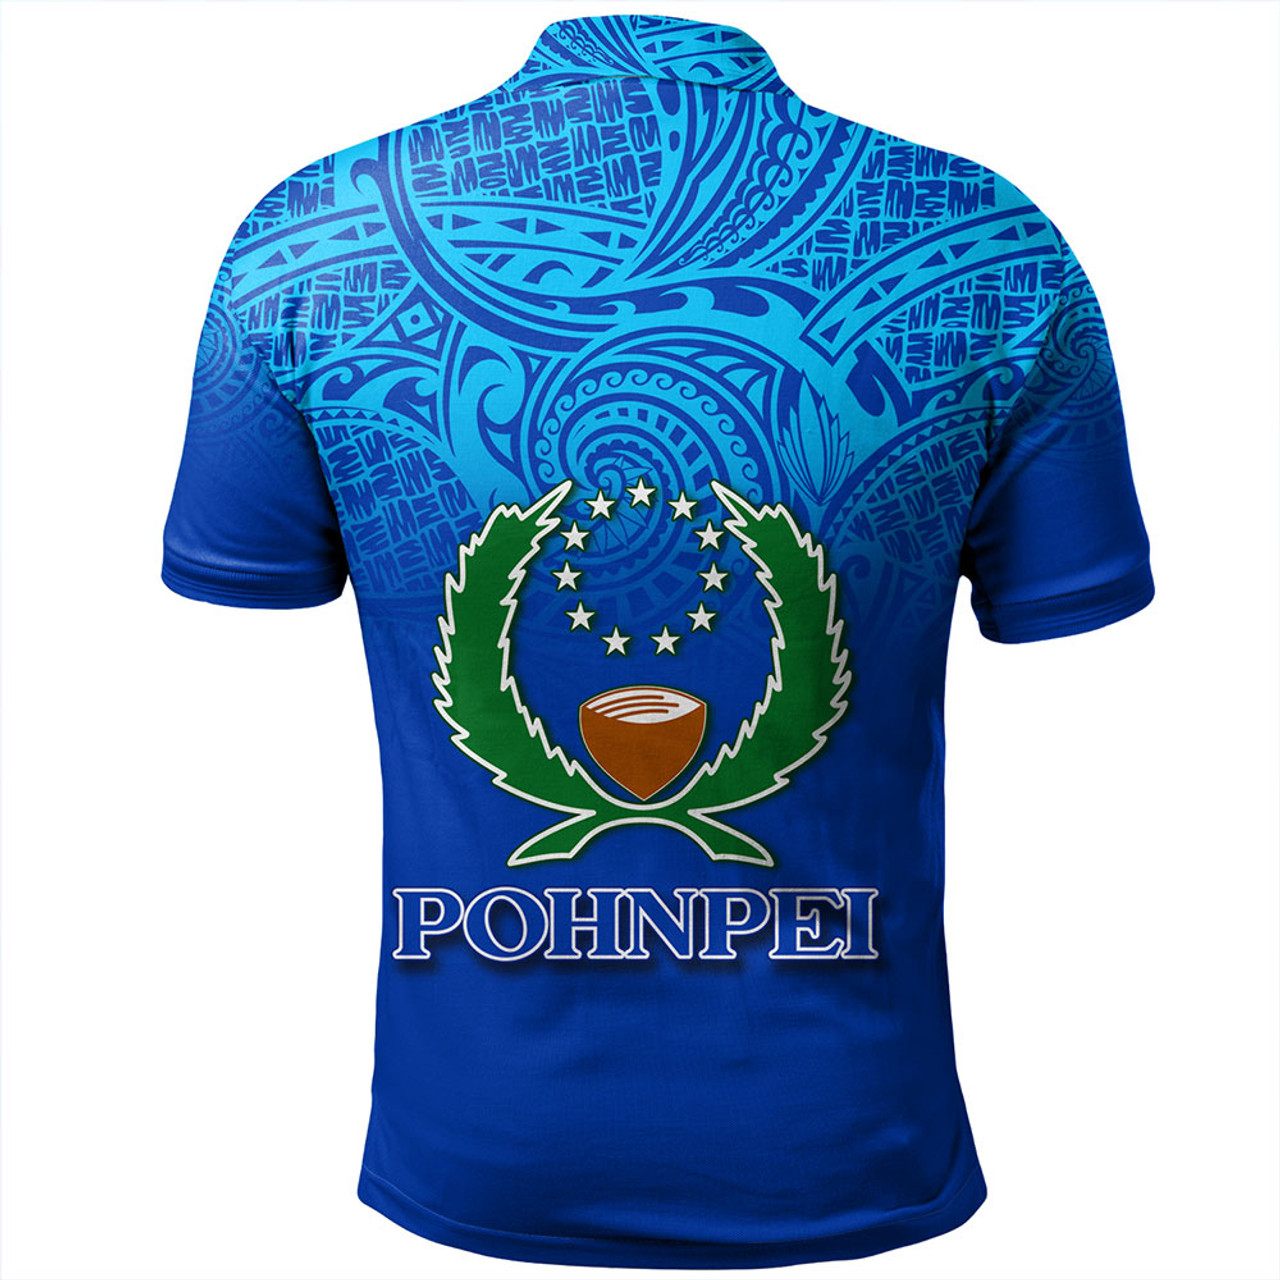 Pohnpei State Polo Shirt Flag Color With Traditional Patterns